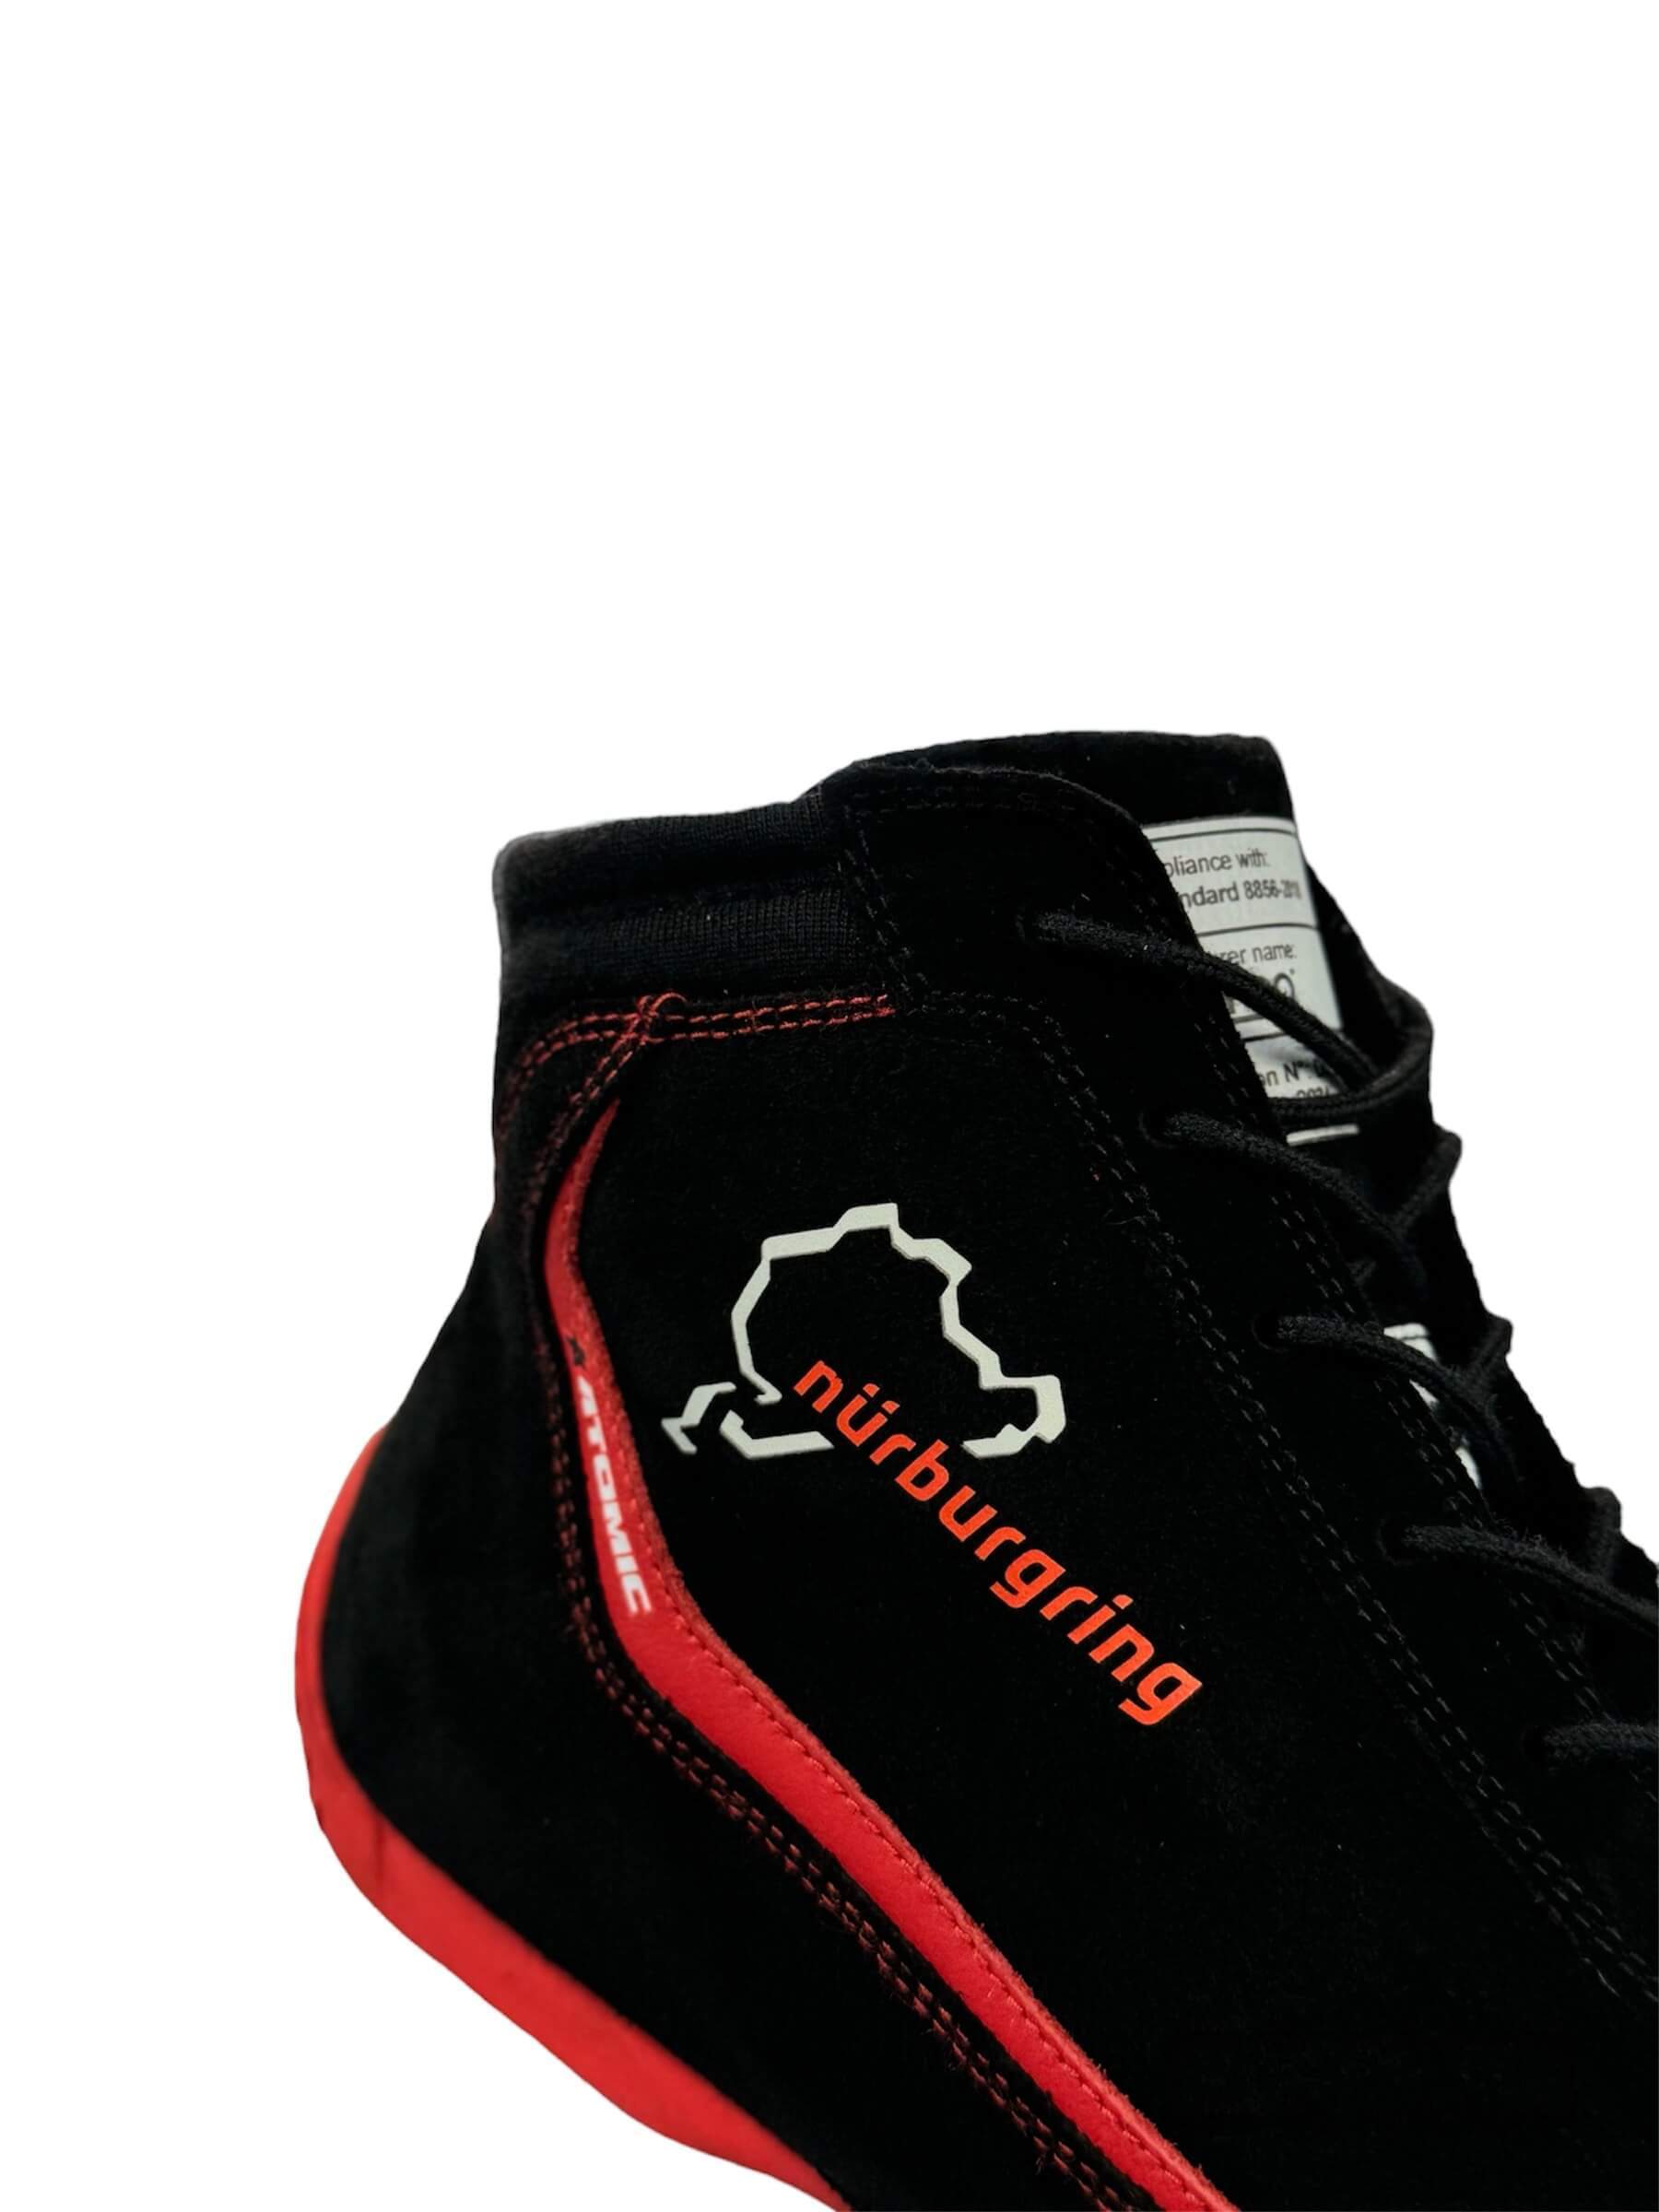 SPARCO 001295SP_NBR46 Shoes Slalom Nurburgring Edition black/red Size 46 Photo-4 